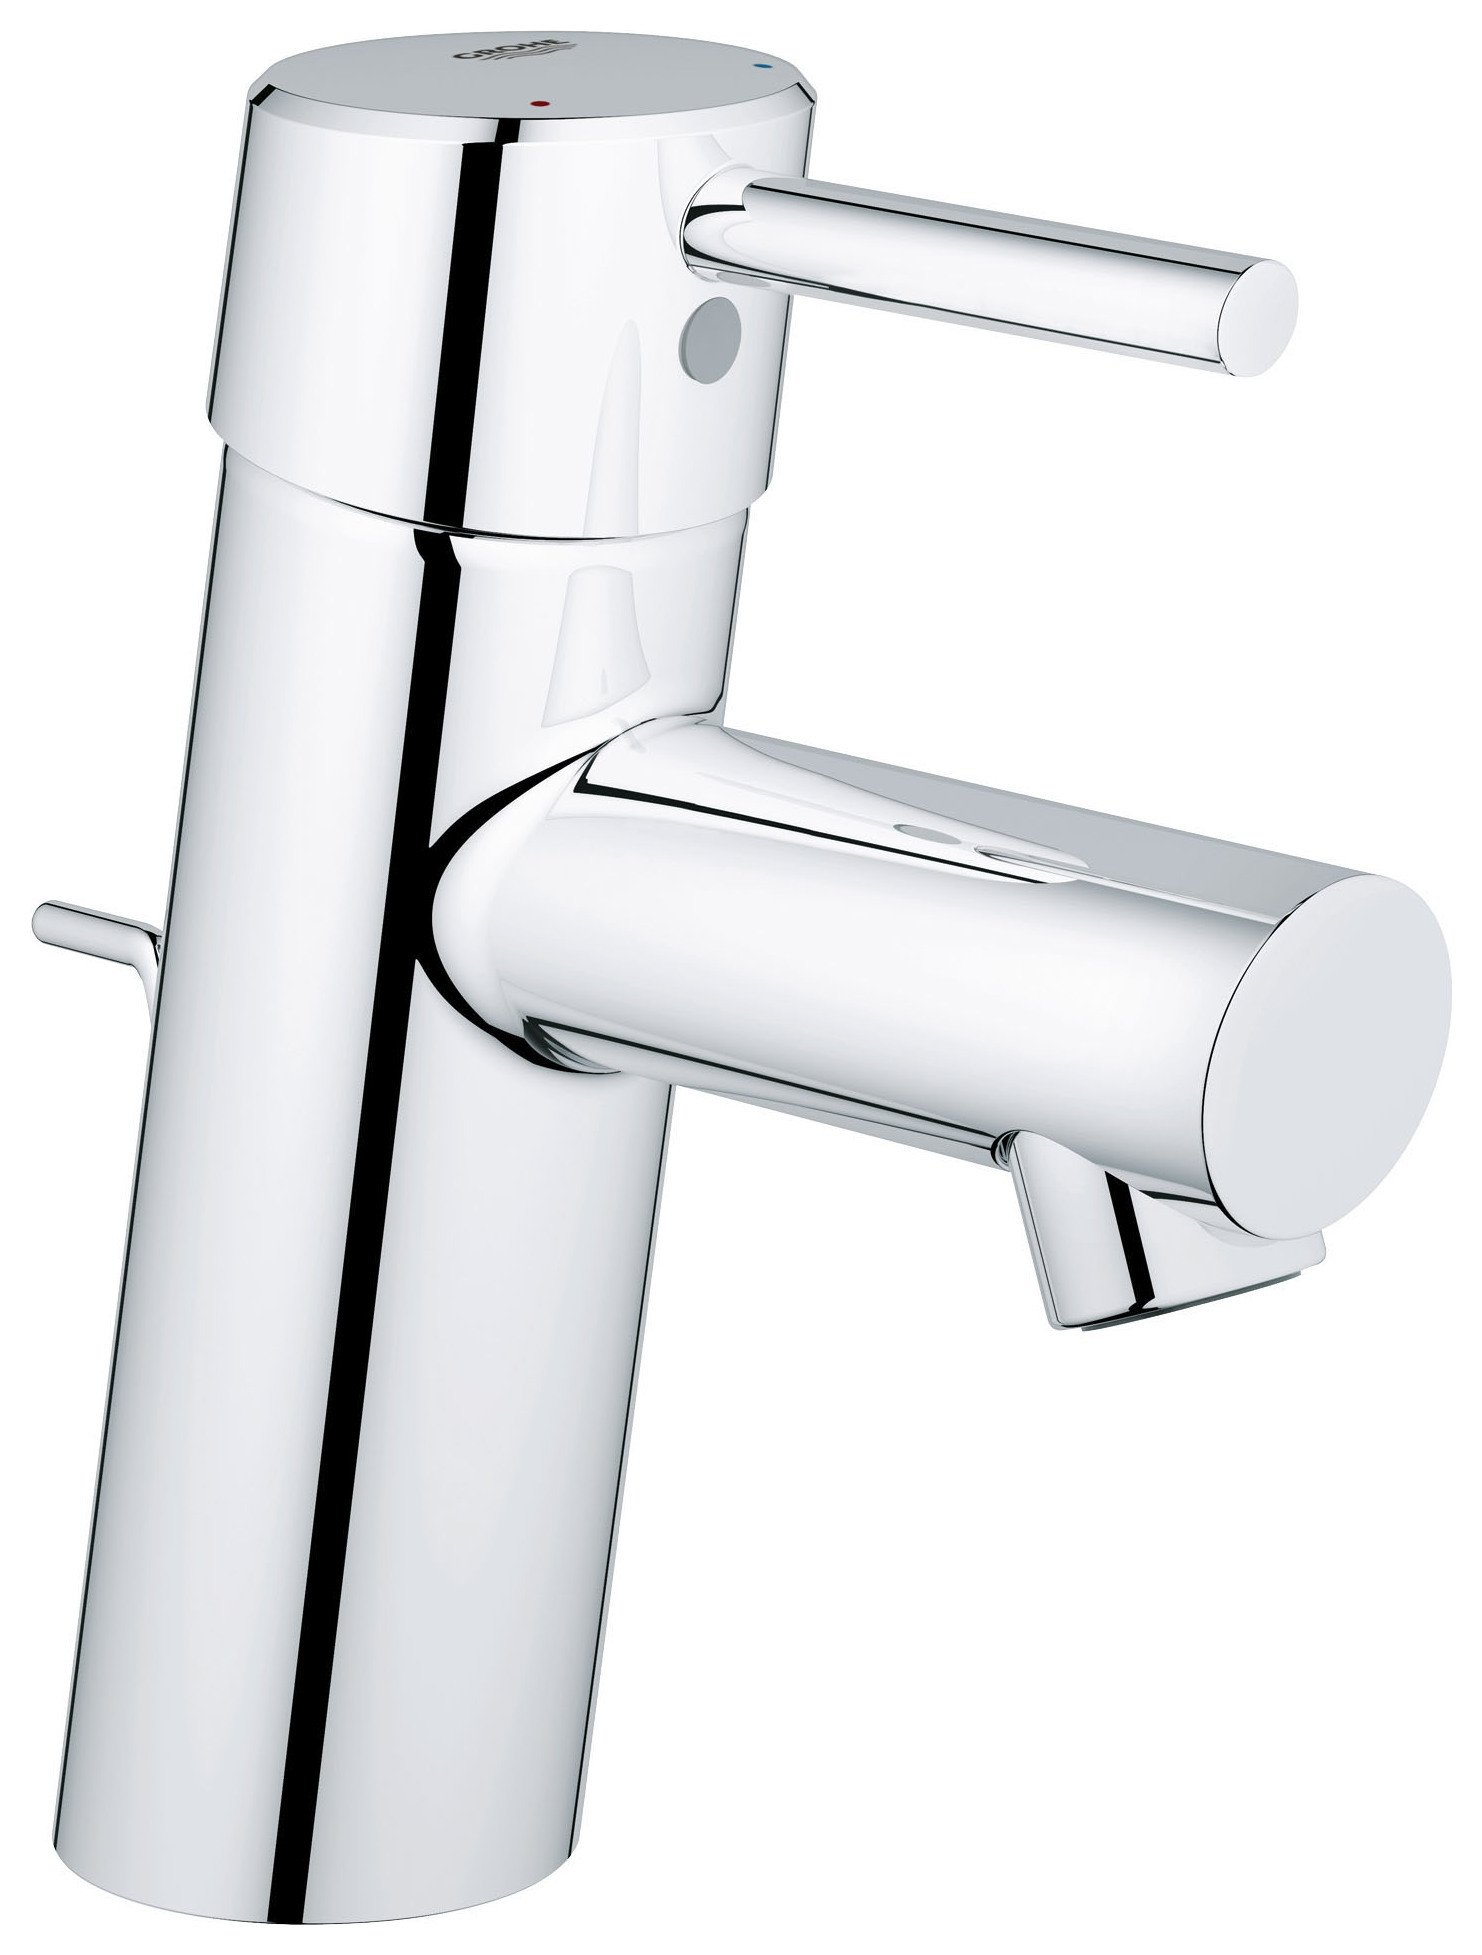 Grohe Feel Basin Mixer Tap. review